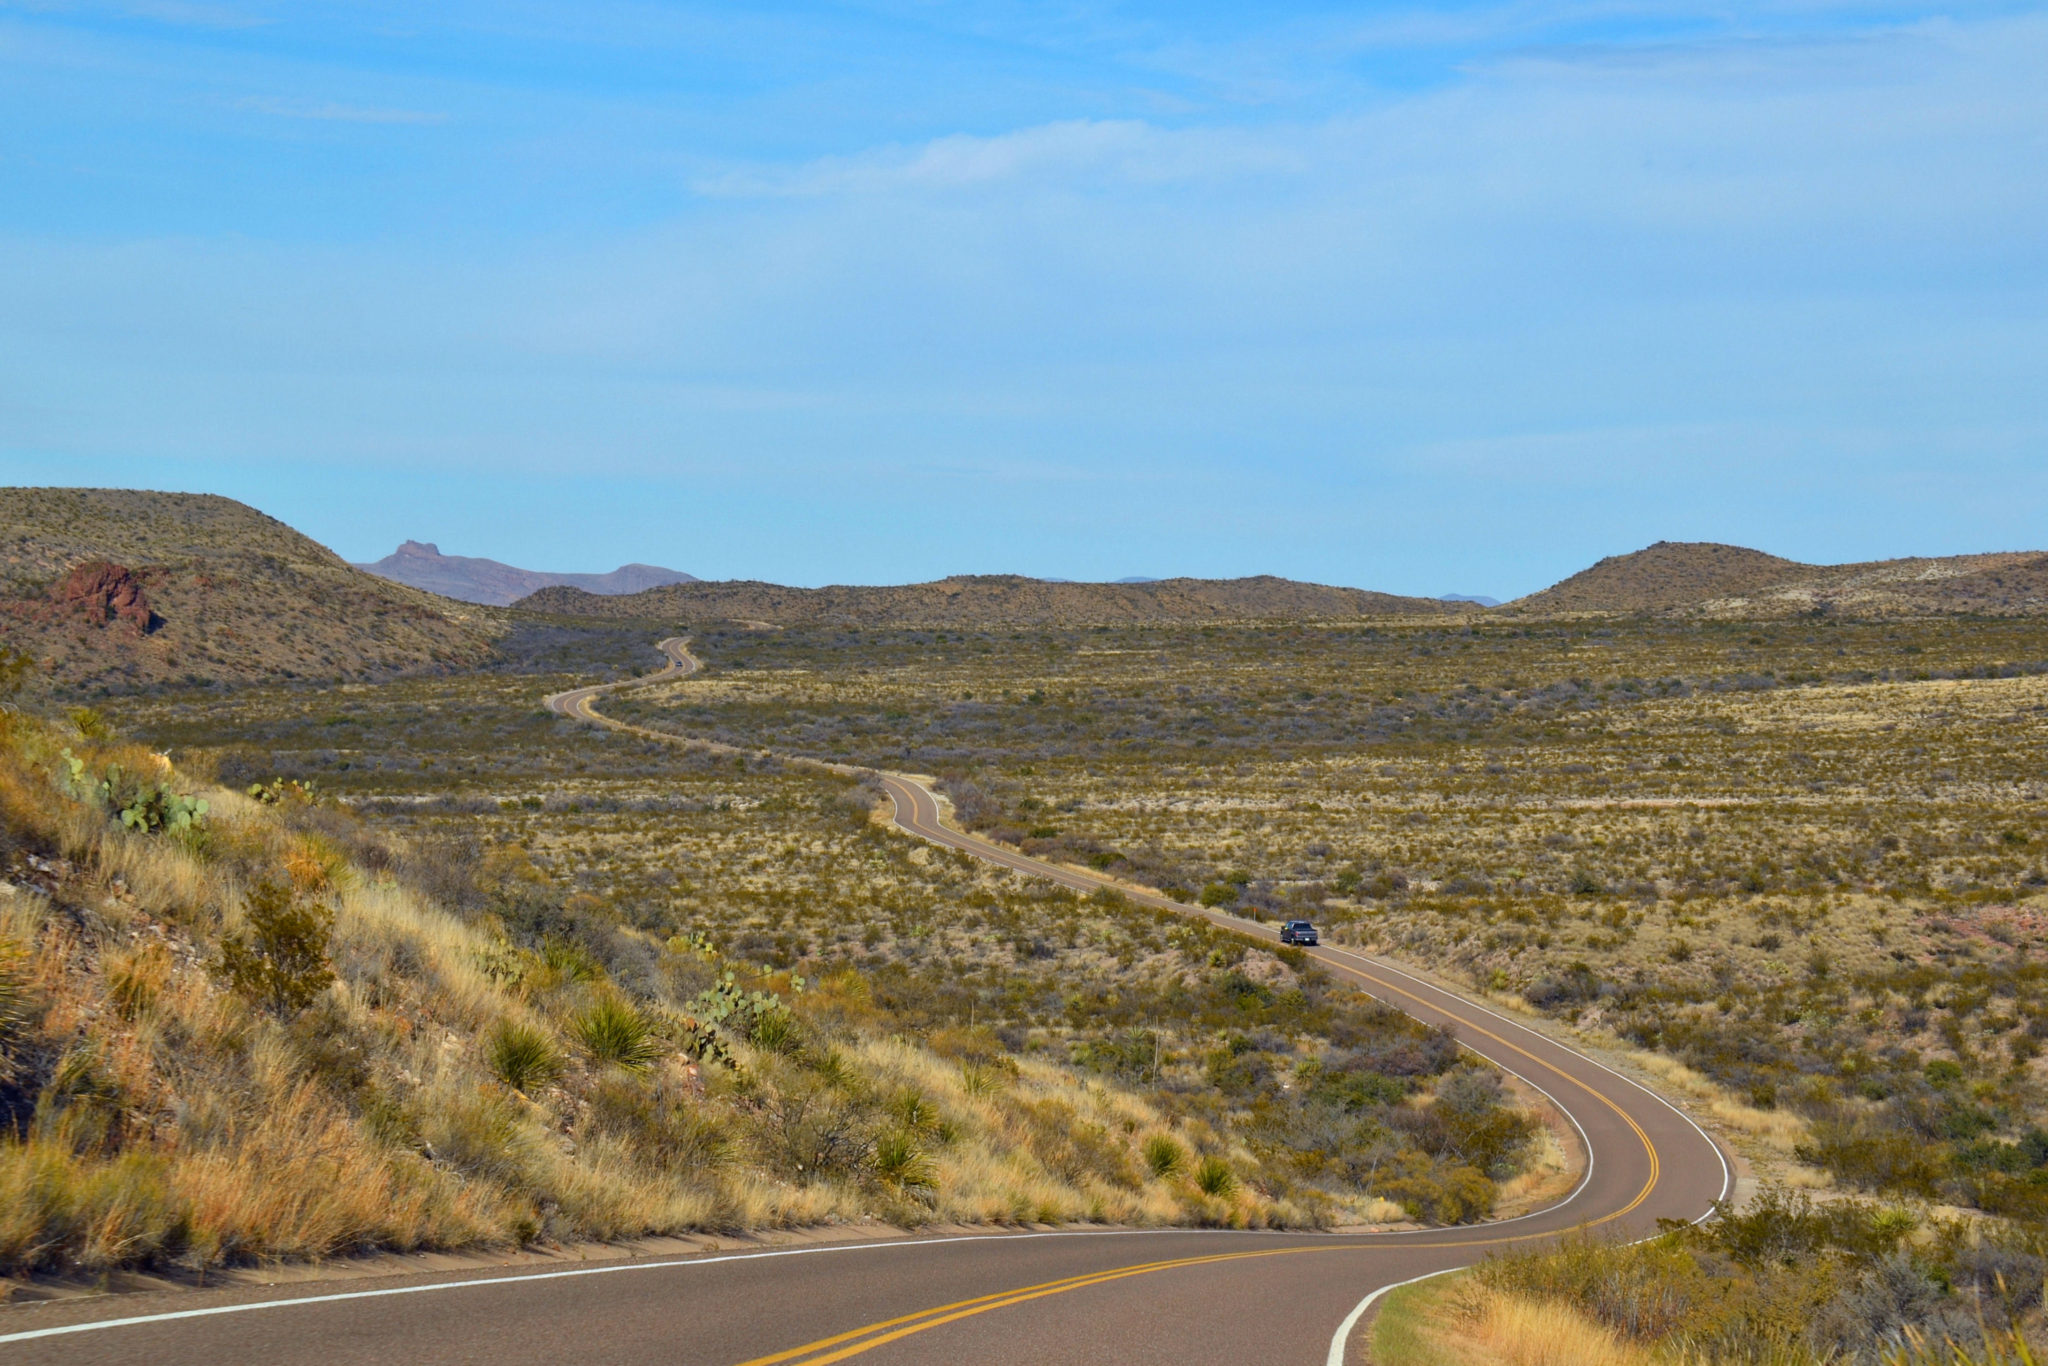 On the road to Chisos Basin